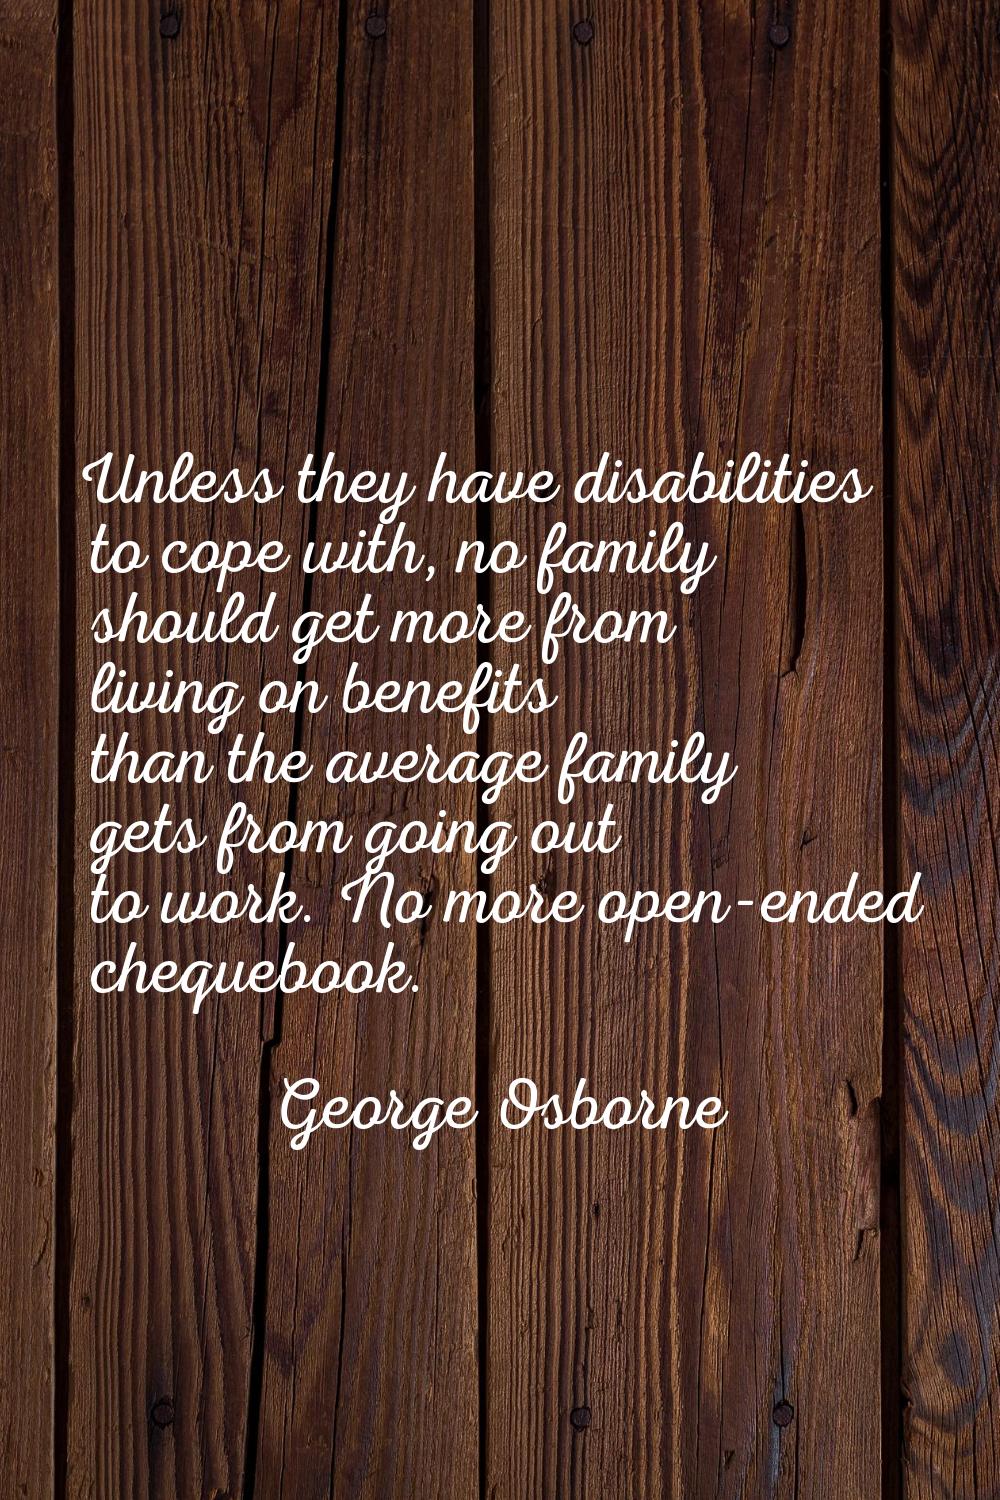 Unless they have disabilities to cope with, no family should get more from living on benefits than 